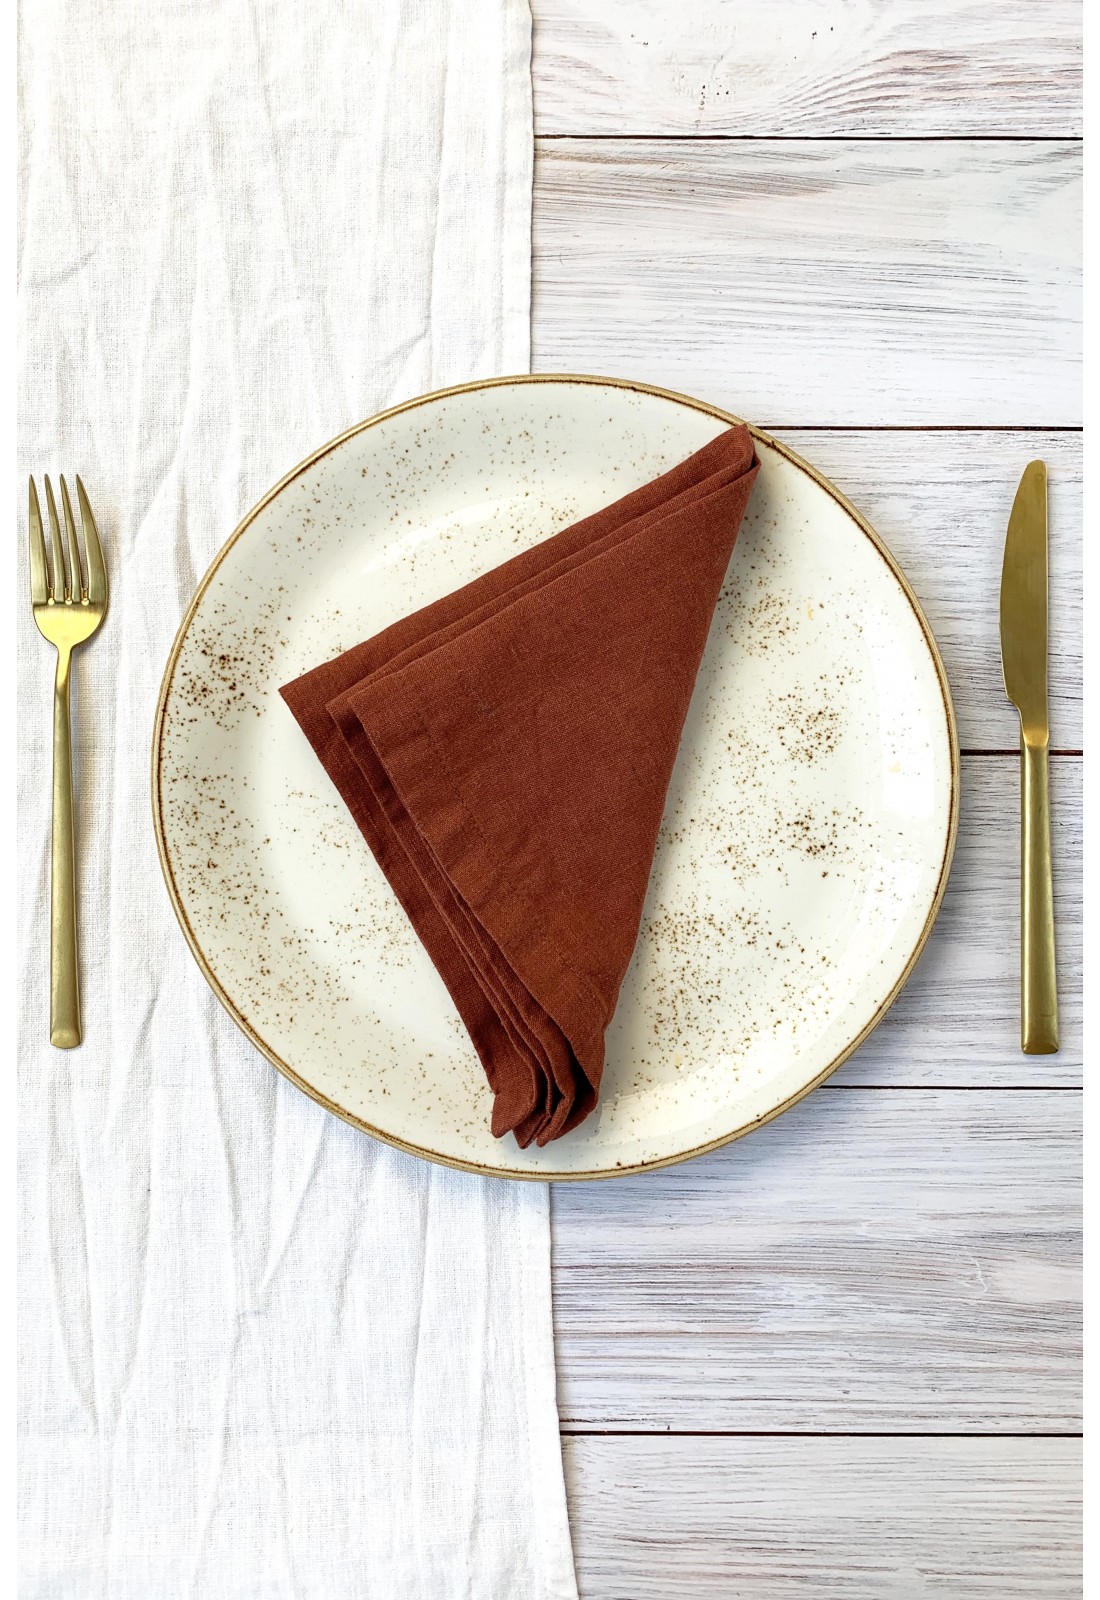 https://www.touchablelinen.com/image/cache/catalog/products/22/Linen-napkins-All-colors-and-sizes-4-1100x1600.jpg